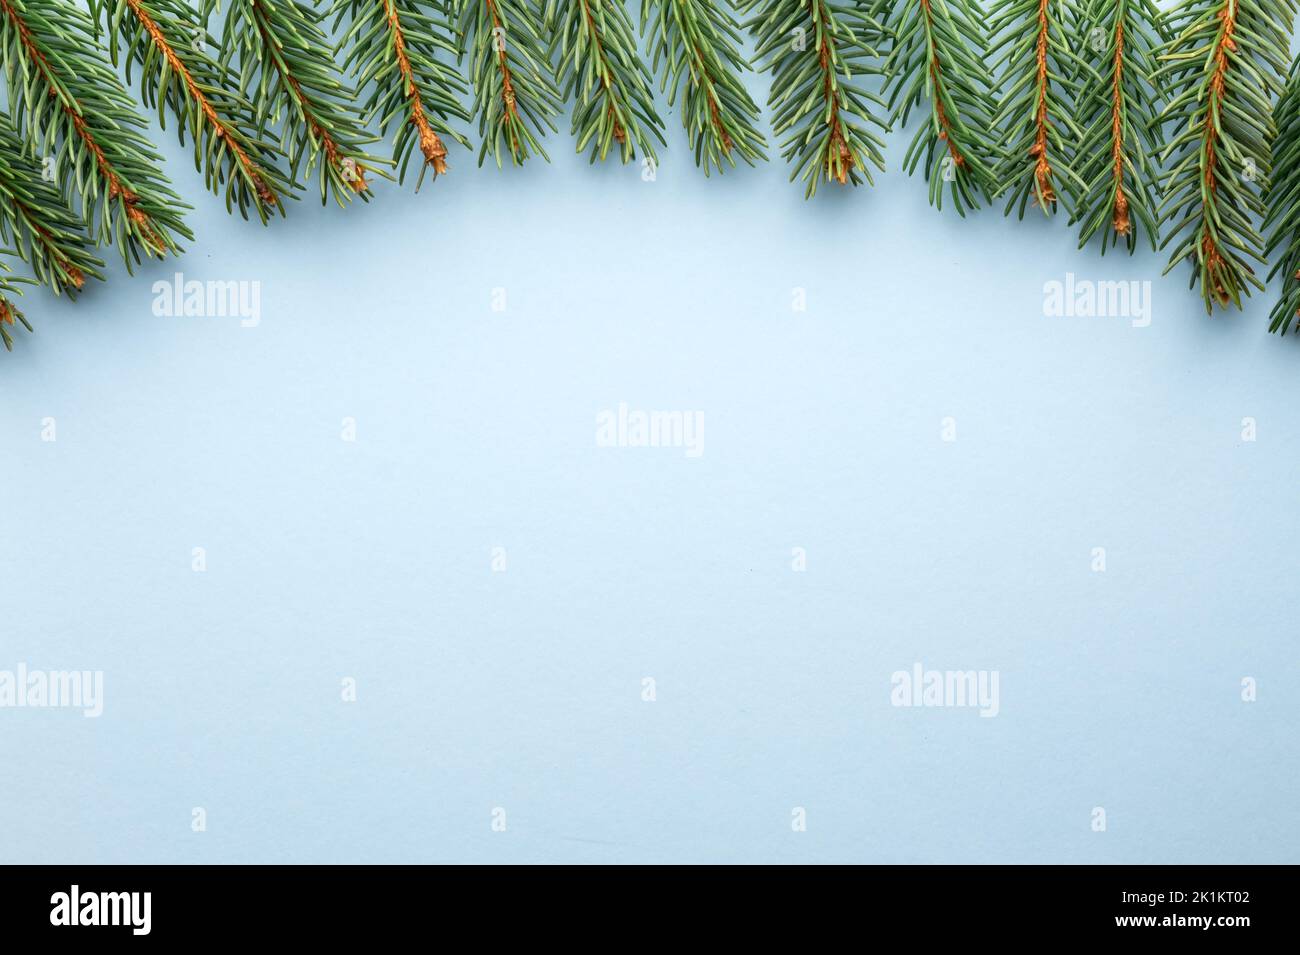 Creative Christmas holidays background with fir twigs on blue cardboard paper background. Flat lay, top view, copy space Stock Photo